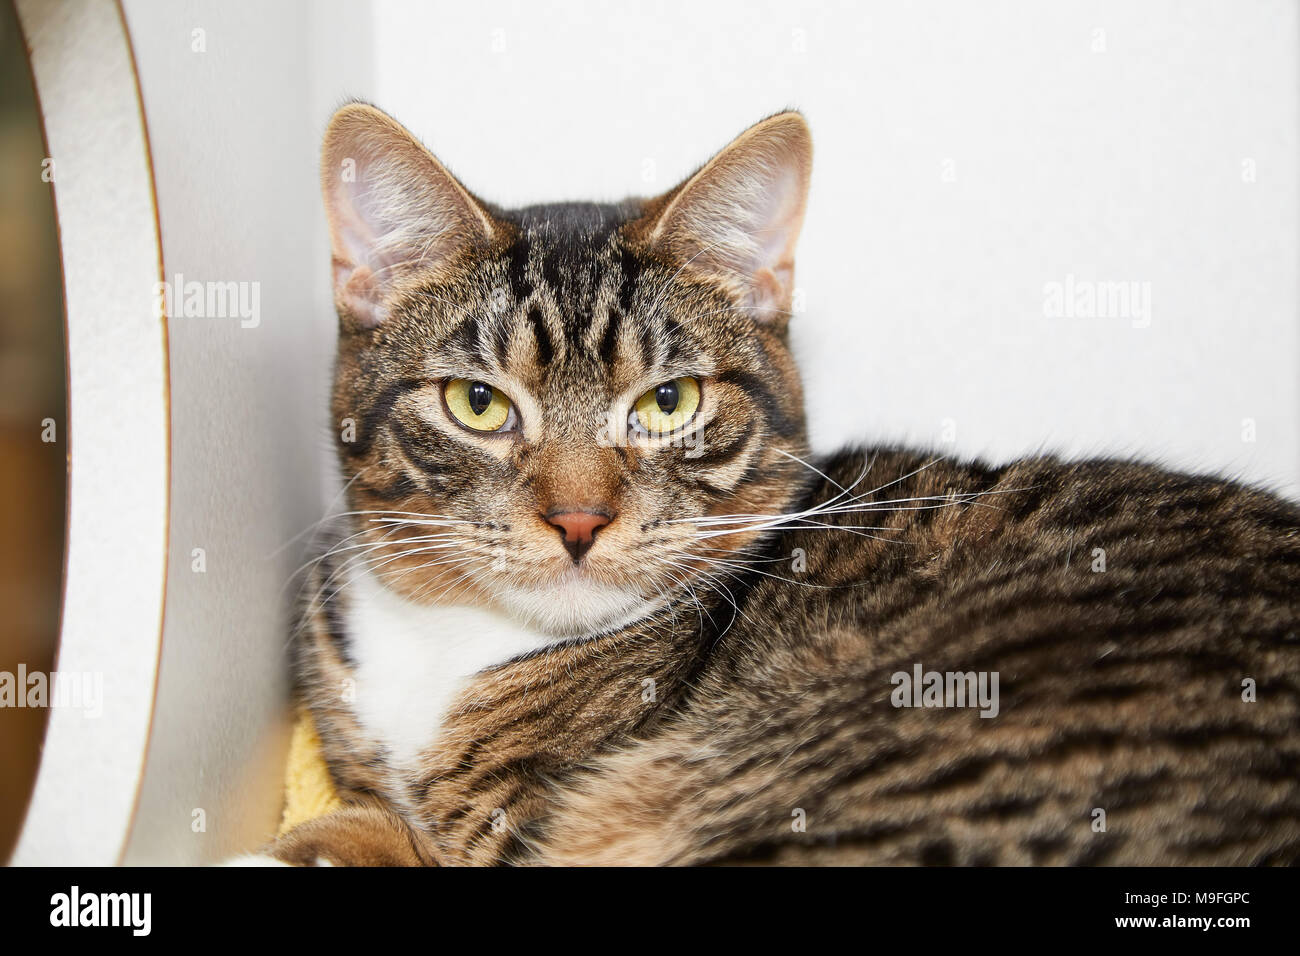 Domestic tabby cat lying inside a box on a blanket staring at the camera in a close up cropped view Stock Photo